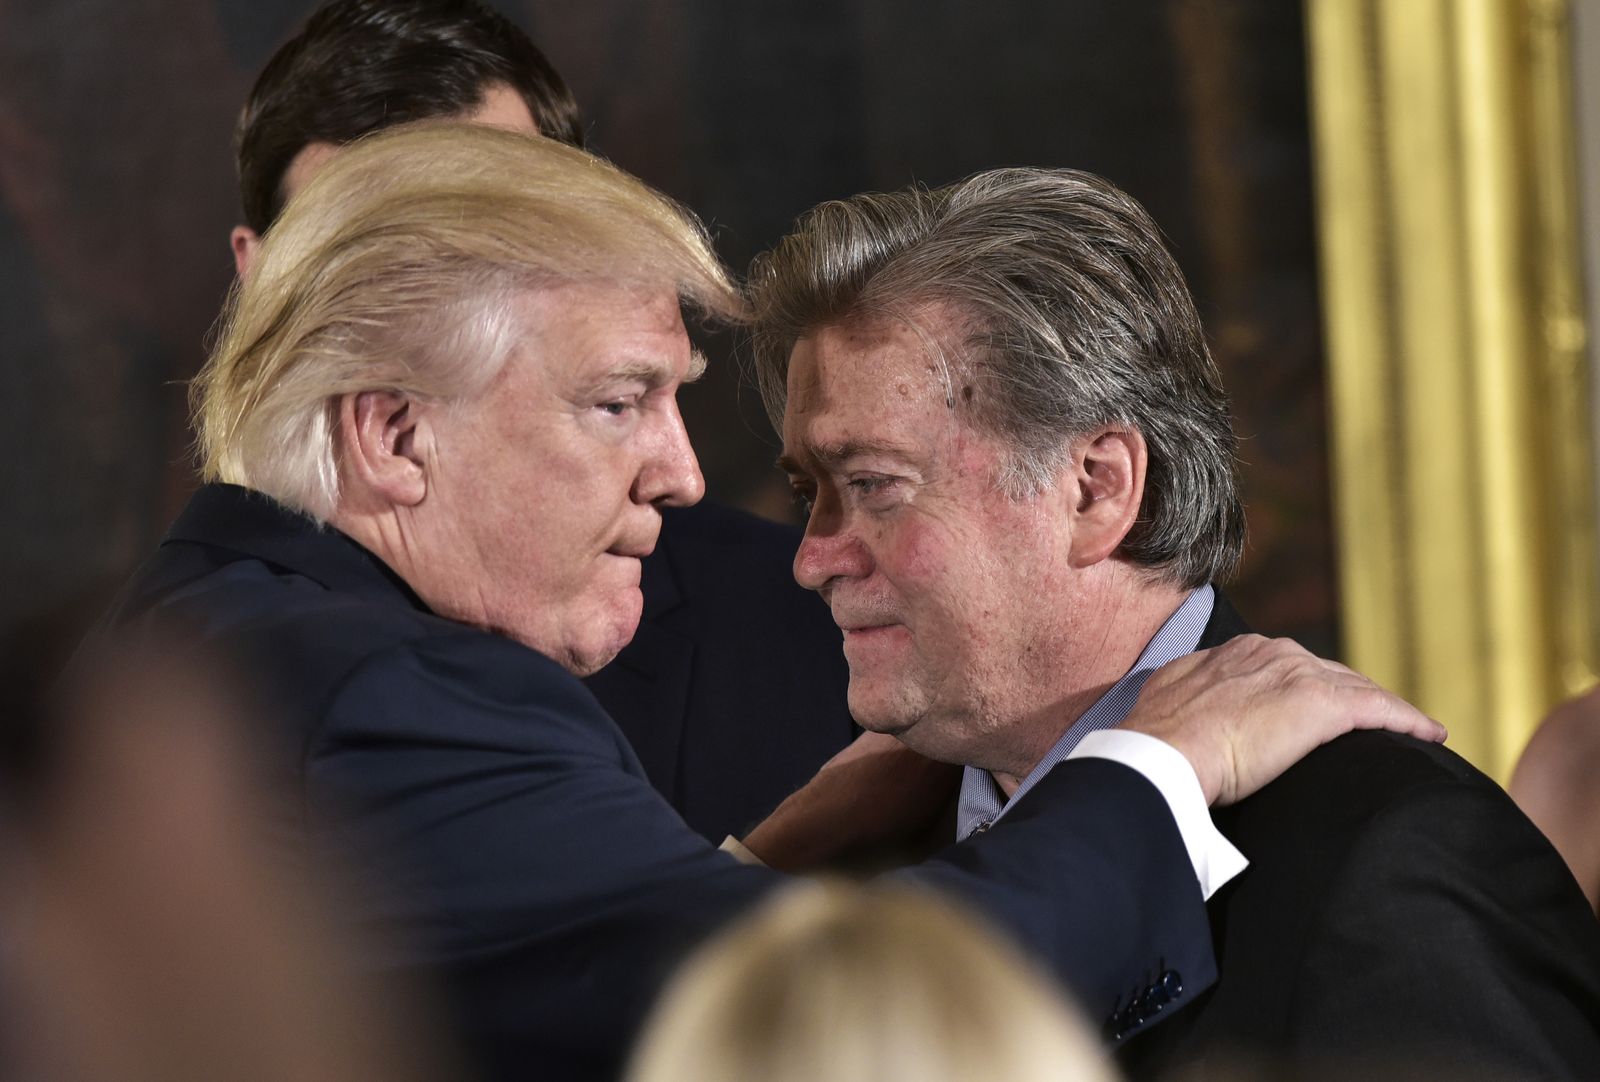 (FILES) In this file photo taken on January 22, 2017 US President Donald Trump (L) congratulates Senior Counselor to the President Stephen Bannon during the swearing-in of senior staff in the East Room of the White House in Washington, DC. - President Donald Trump has decided to pardon his influential former adviser Steve Bannon, US media reported January 19, 2021, though no official announcement had been made as Trump counted down his final hours in the White House. Bannon was granted clemency after being charged with defrauding people over funds raised to build the Mexico border wall that was a flagship Trump policy, the New York Times said citing White House officials. (Photo by MANDEL NGAN / AFP) - AFP